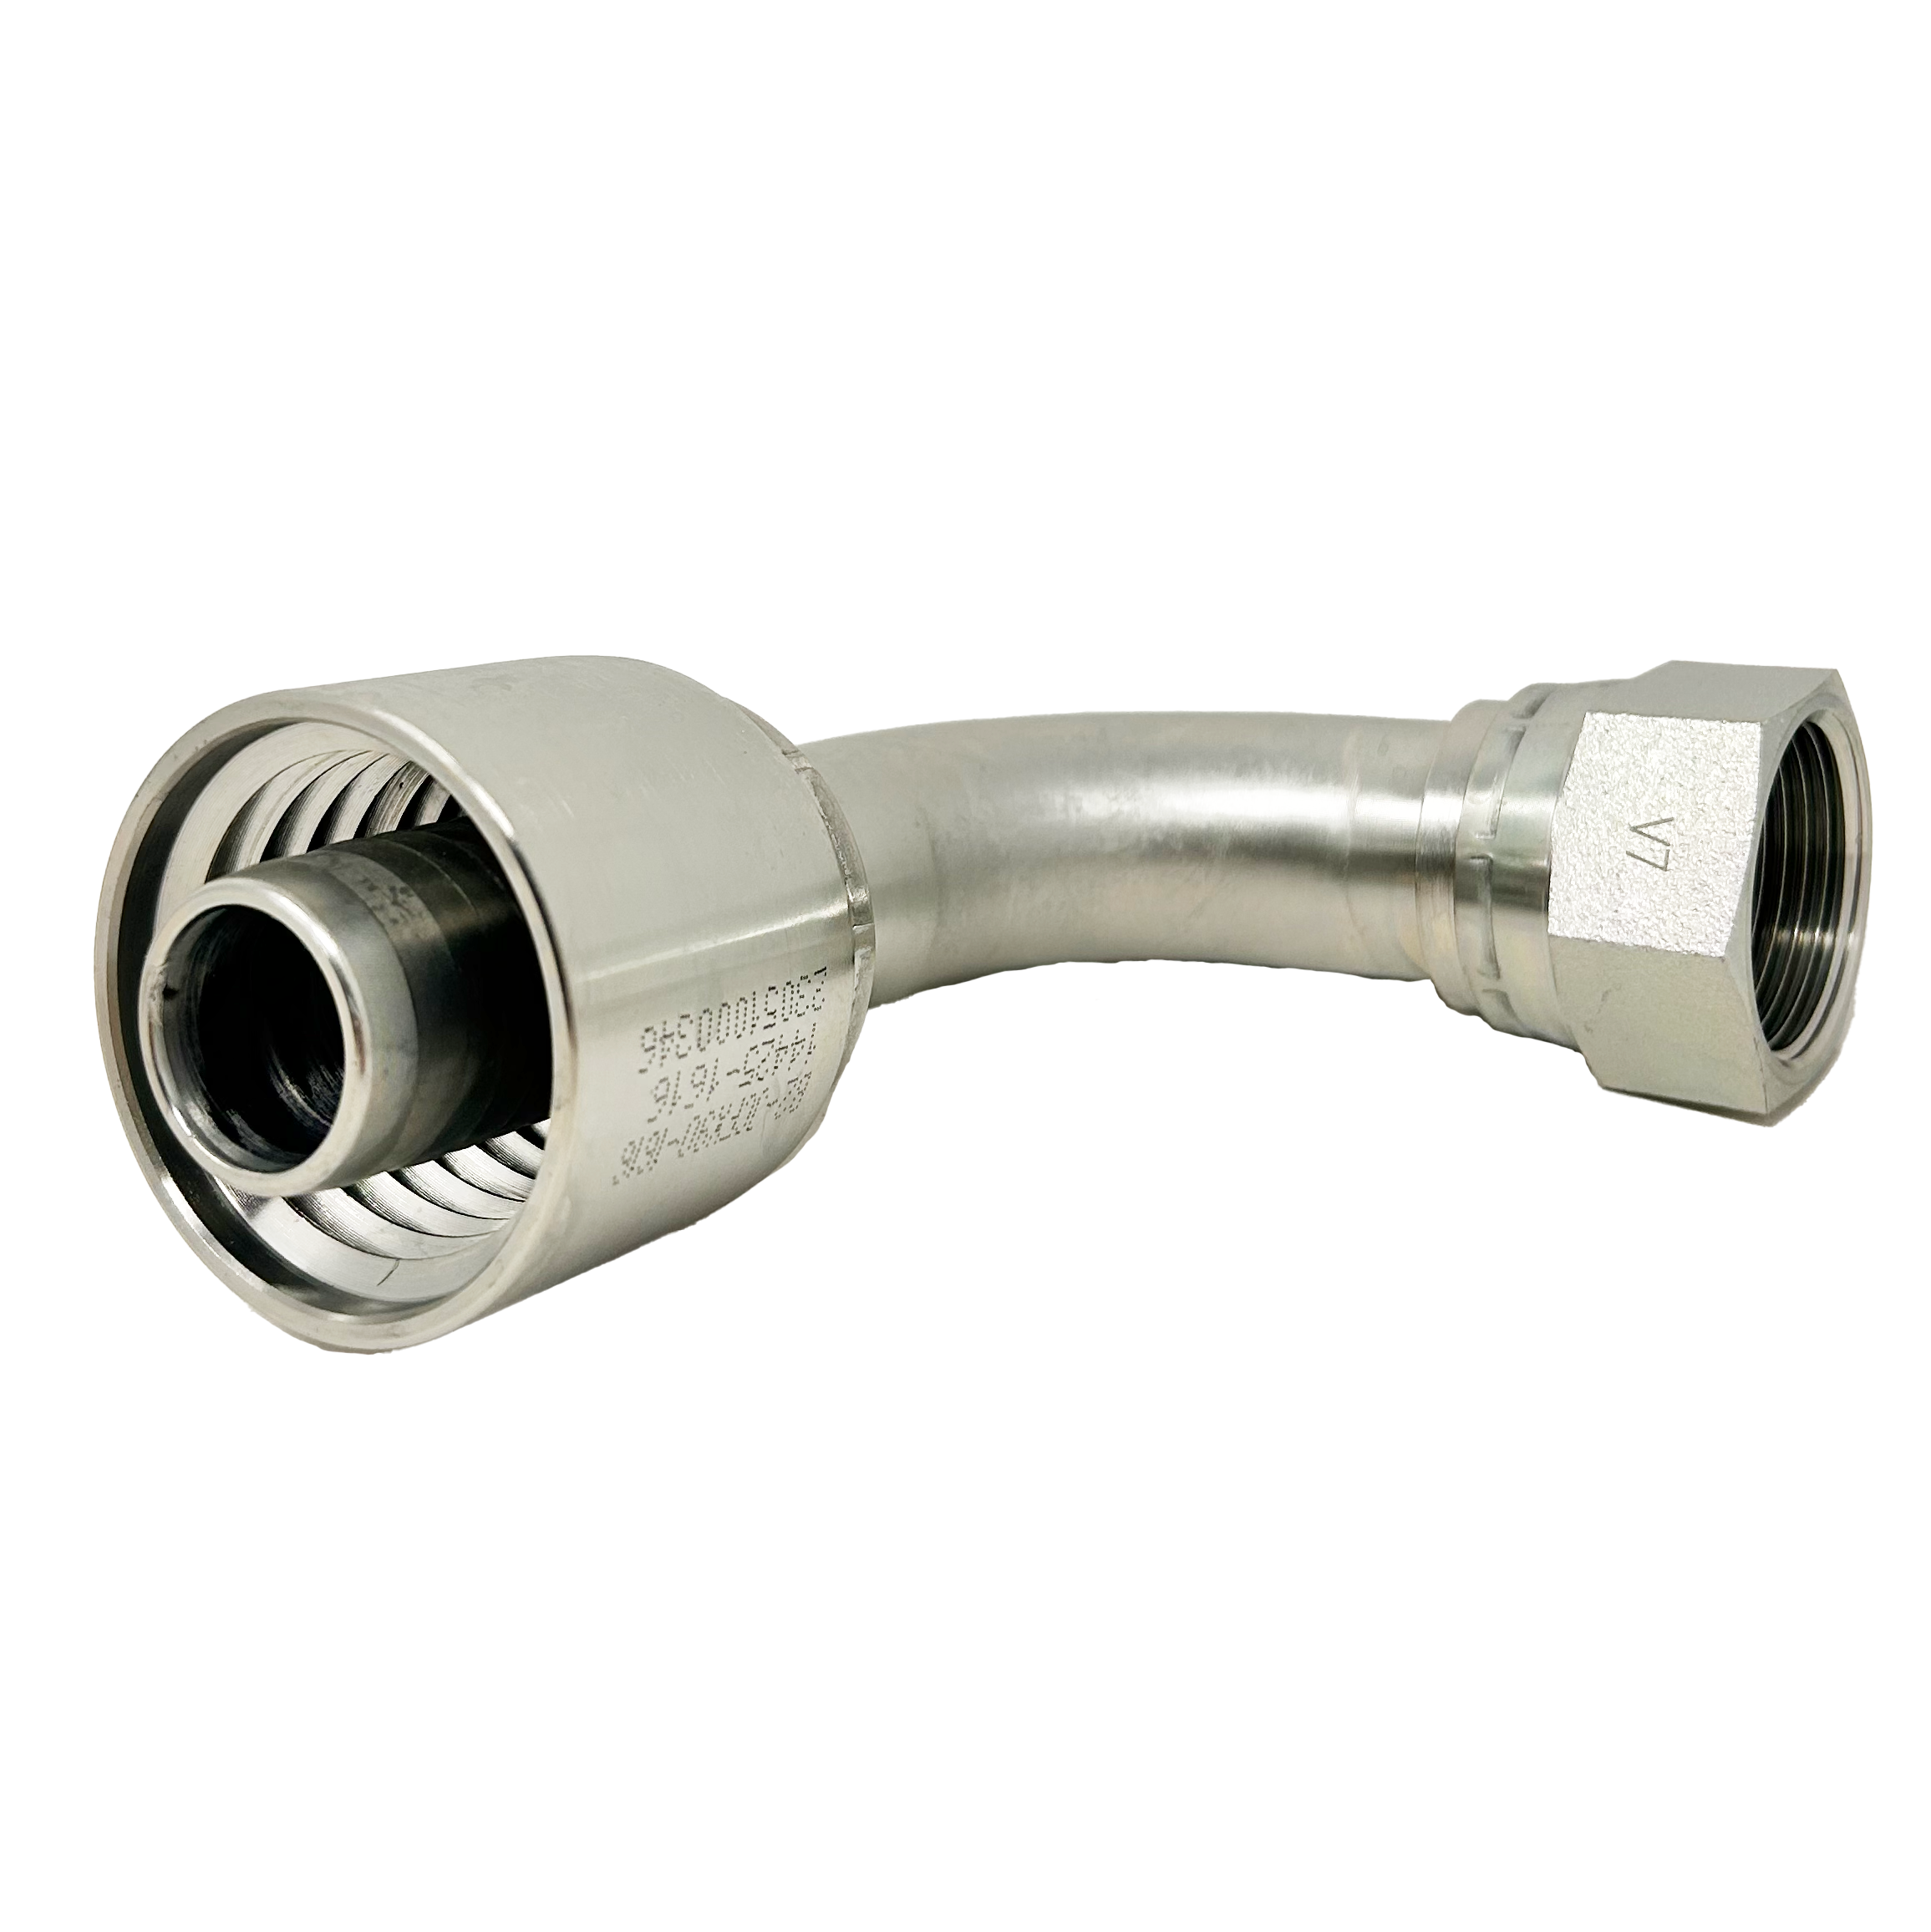 B2-JCFX90-2024: Continental Hose Fitting, 1.25 (1-1/4") Hose ID x 1-7/8-12 Female JIC, 90-Degree Swivel Connection